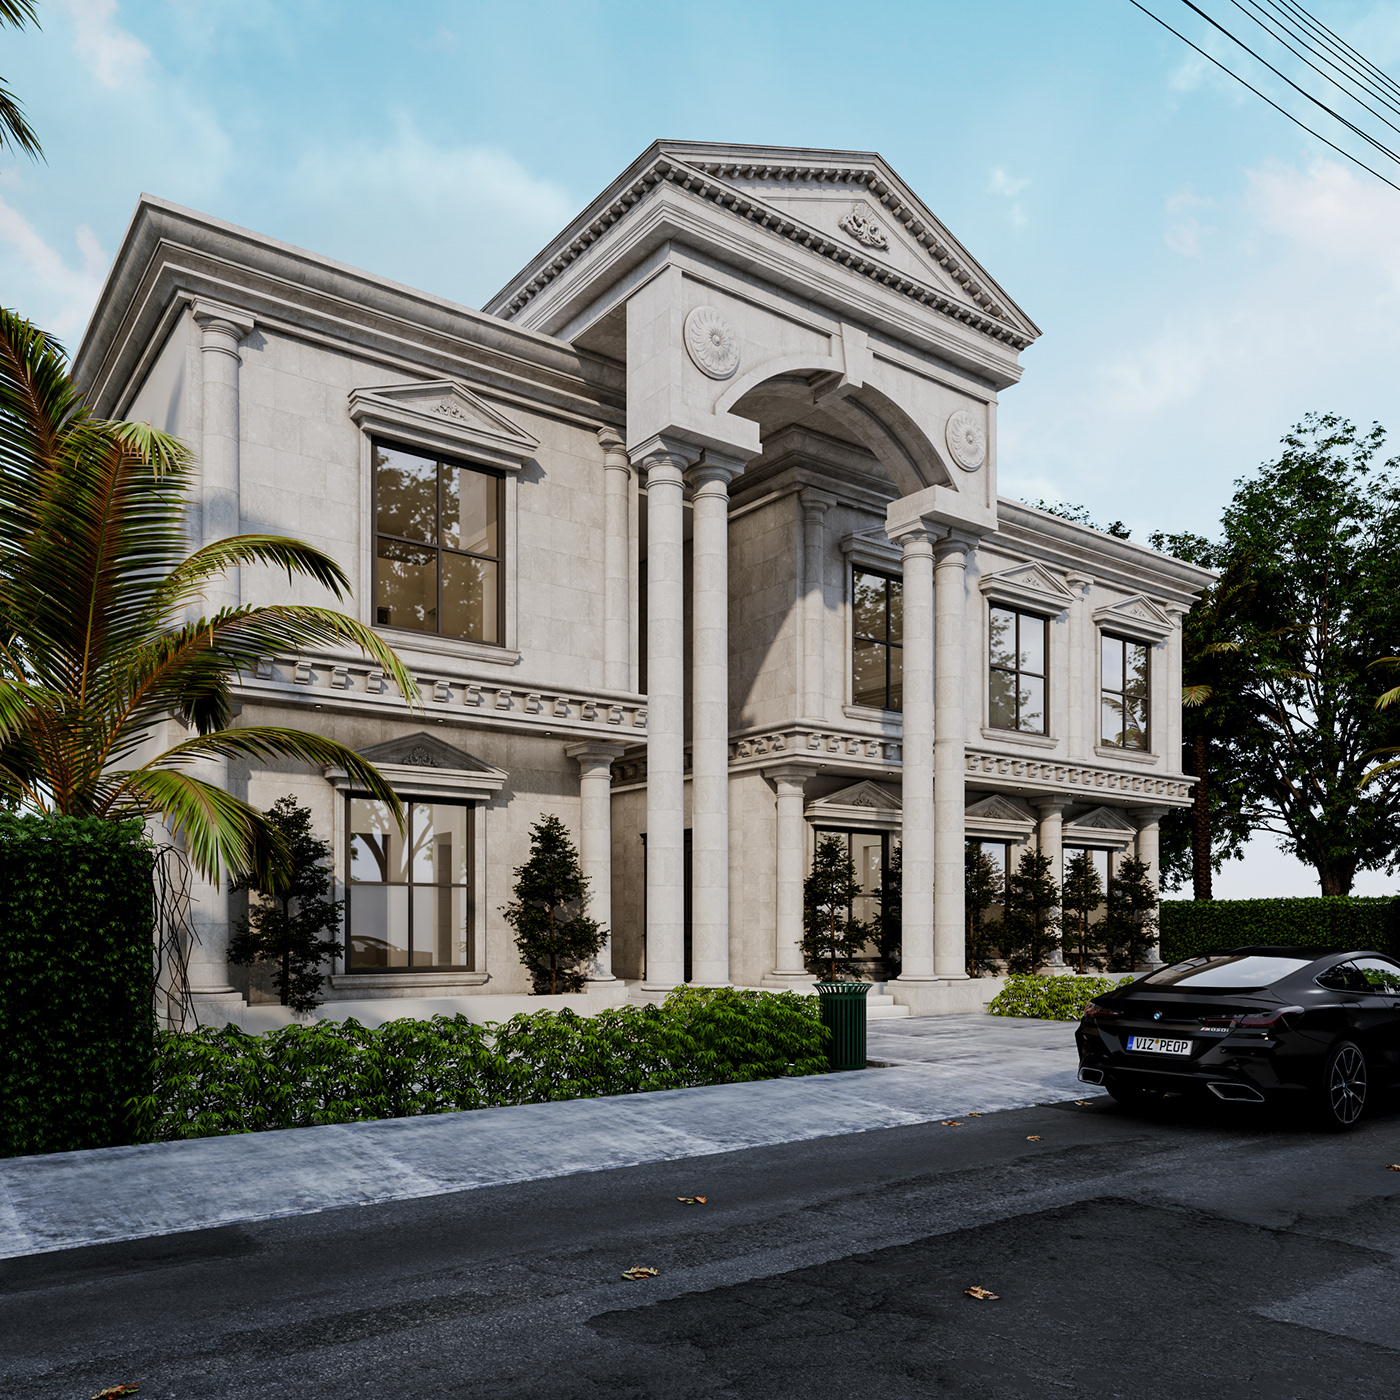 3d modeling 3dmax architecture architecture design classical architecture classical design Virtual reality vr